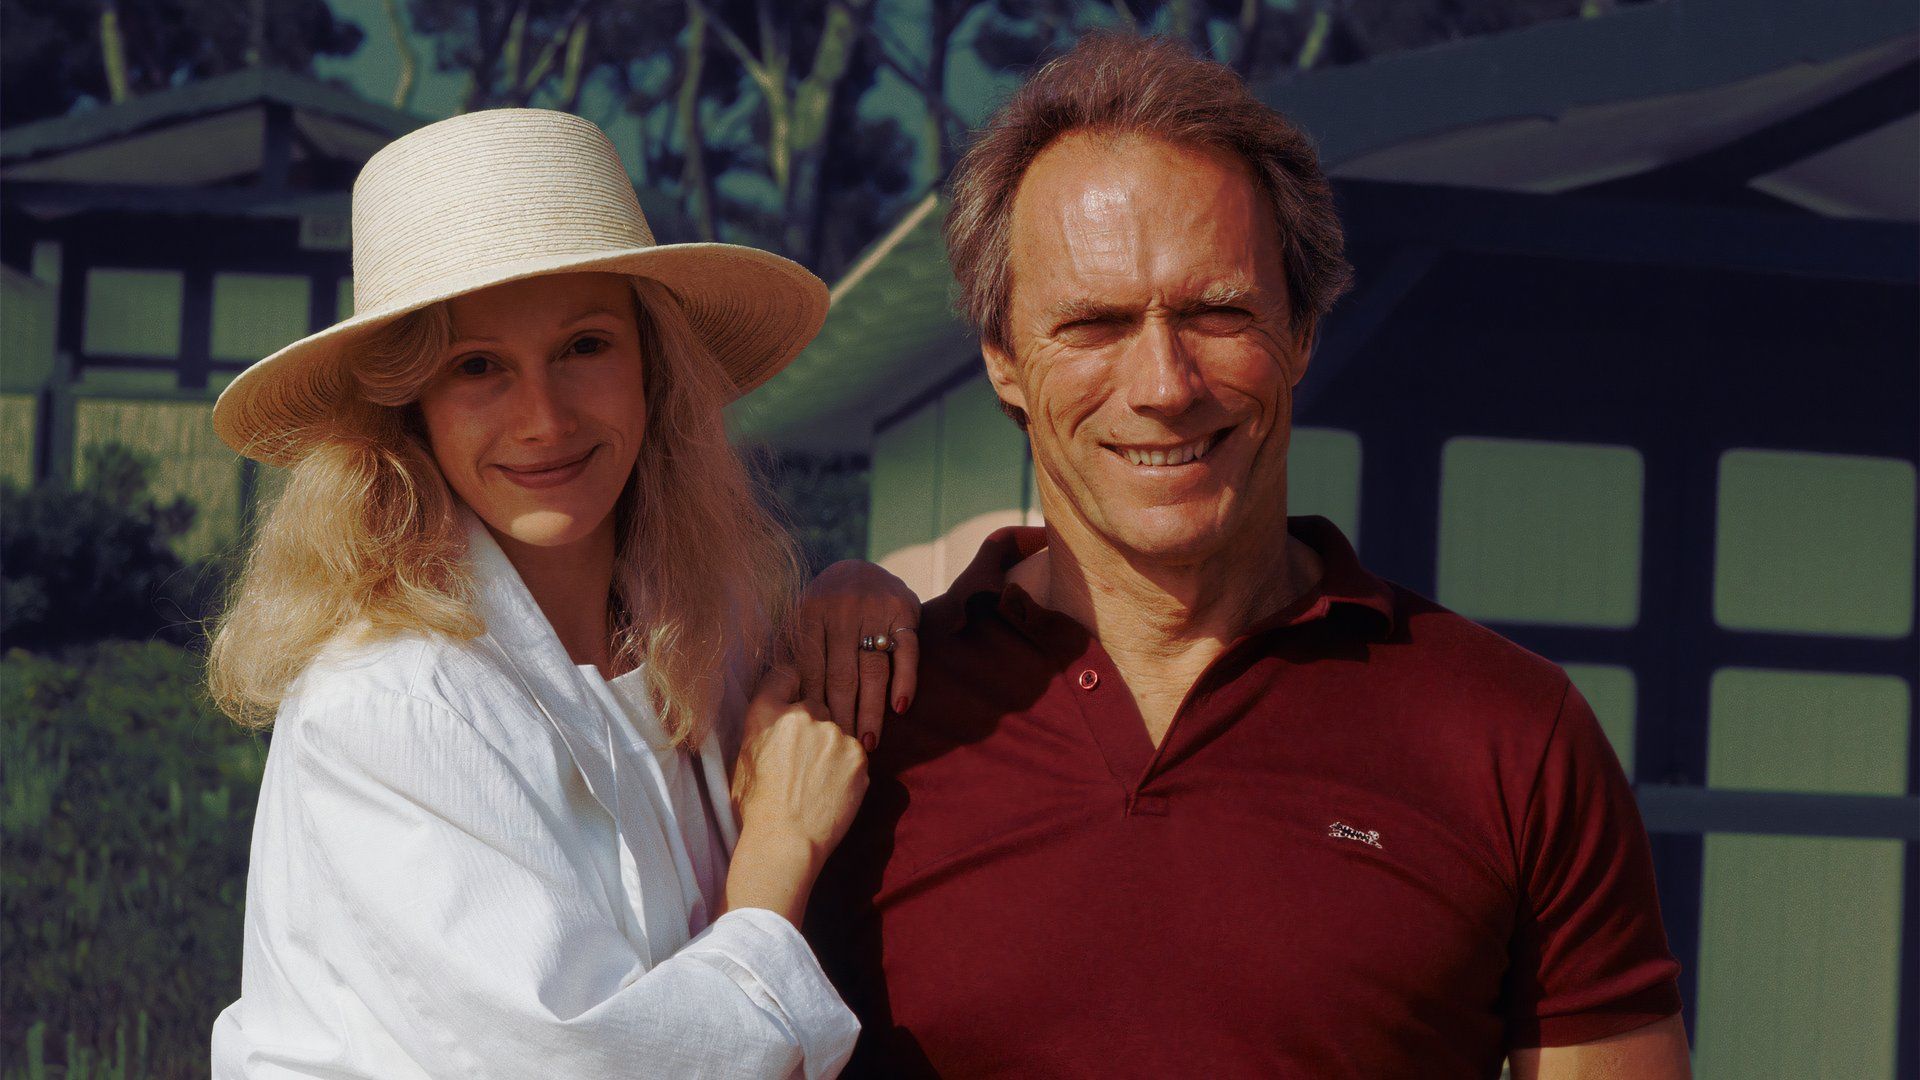 An edited image of Clint Eastwood and Sondra Locke posing for a photo together